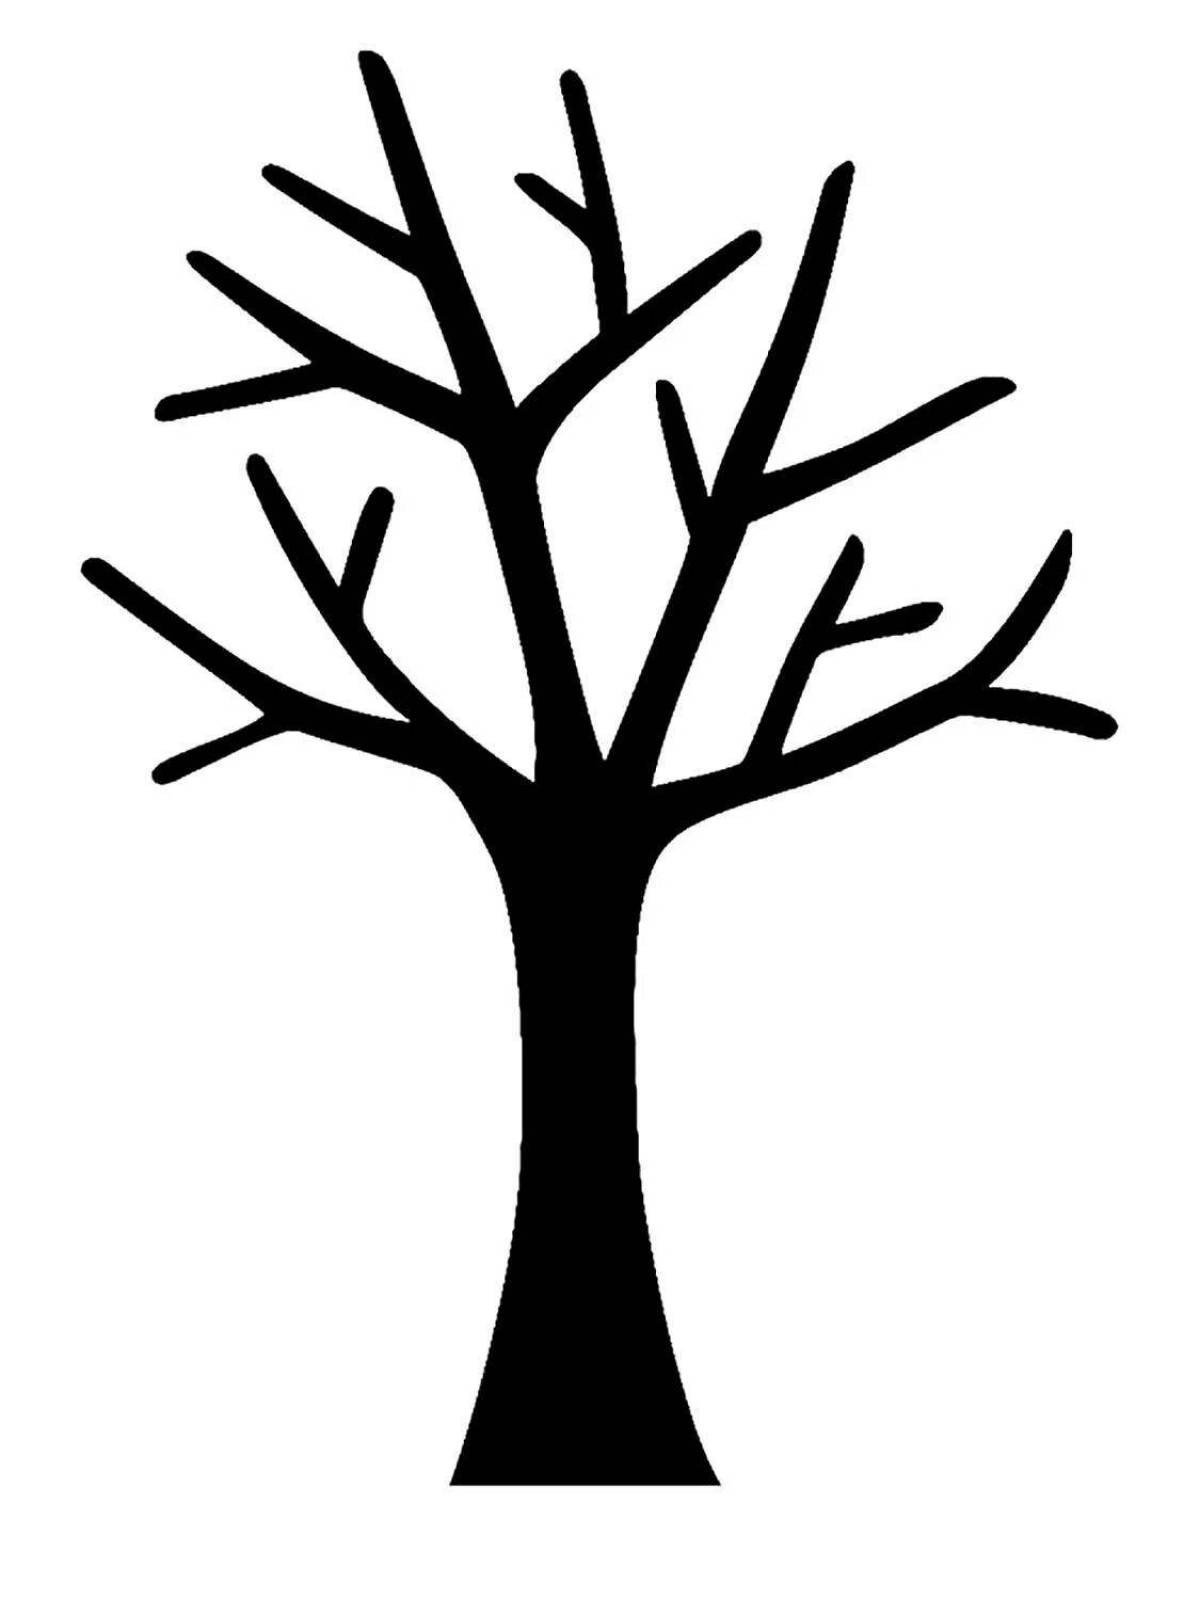 Coloring book incredible tree silhouette